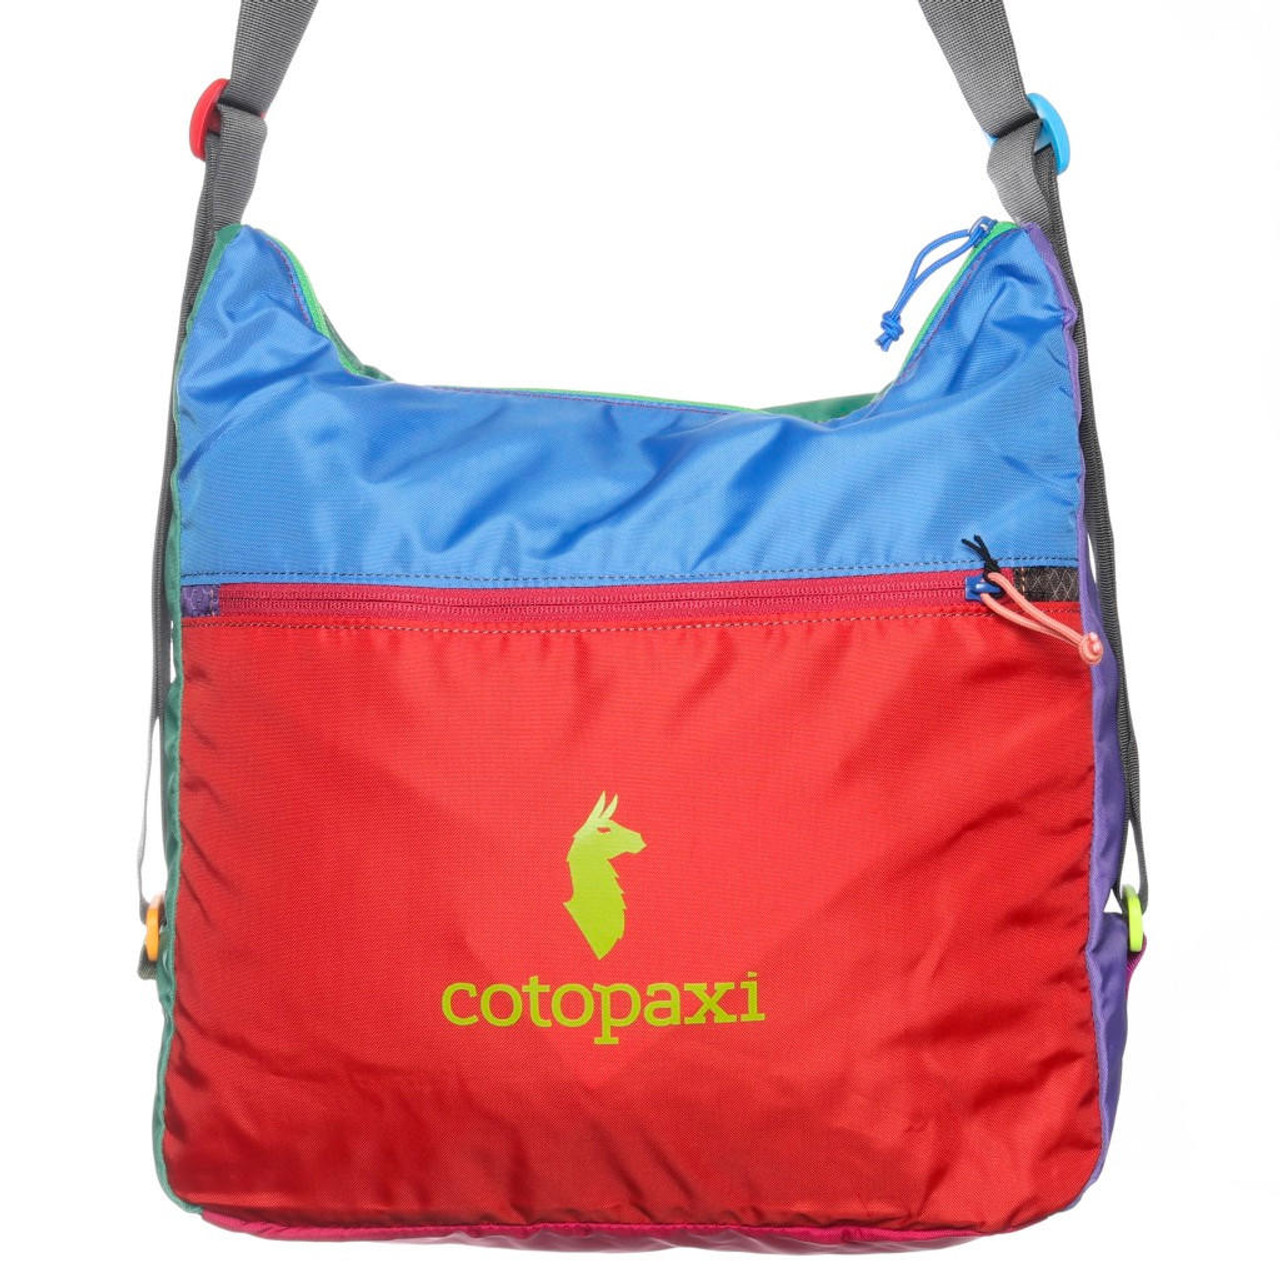 Cotopaxi Taal Convertible Tote | Cotopaxi